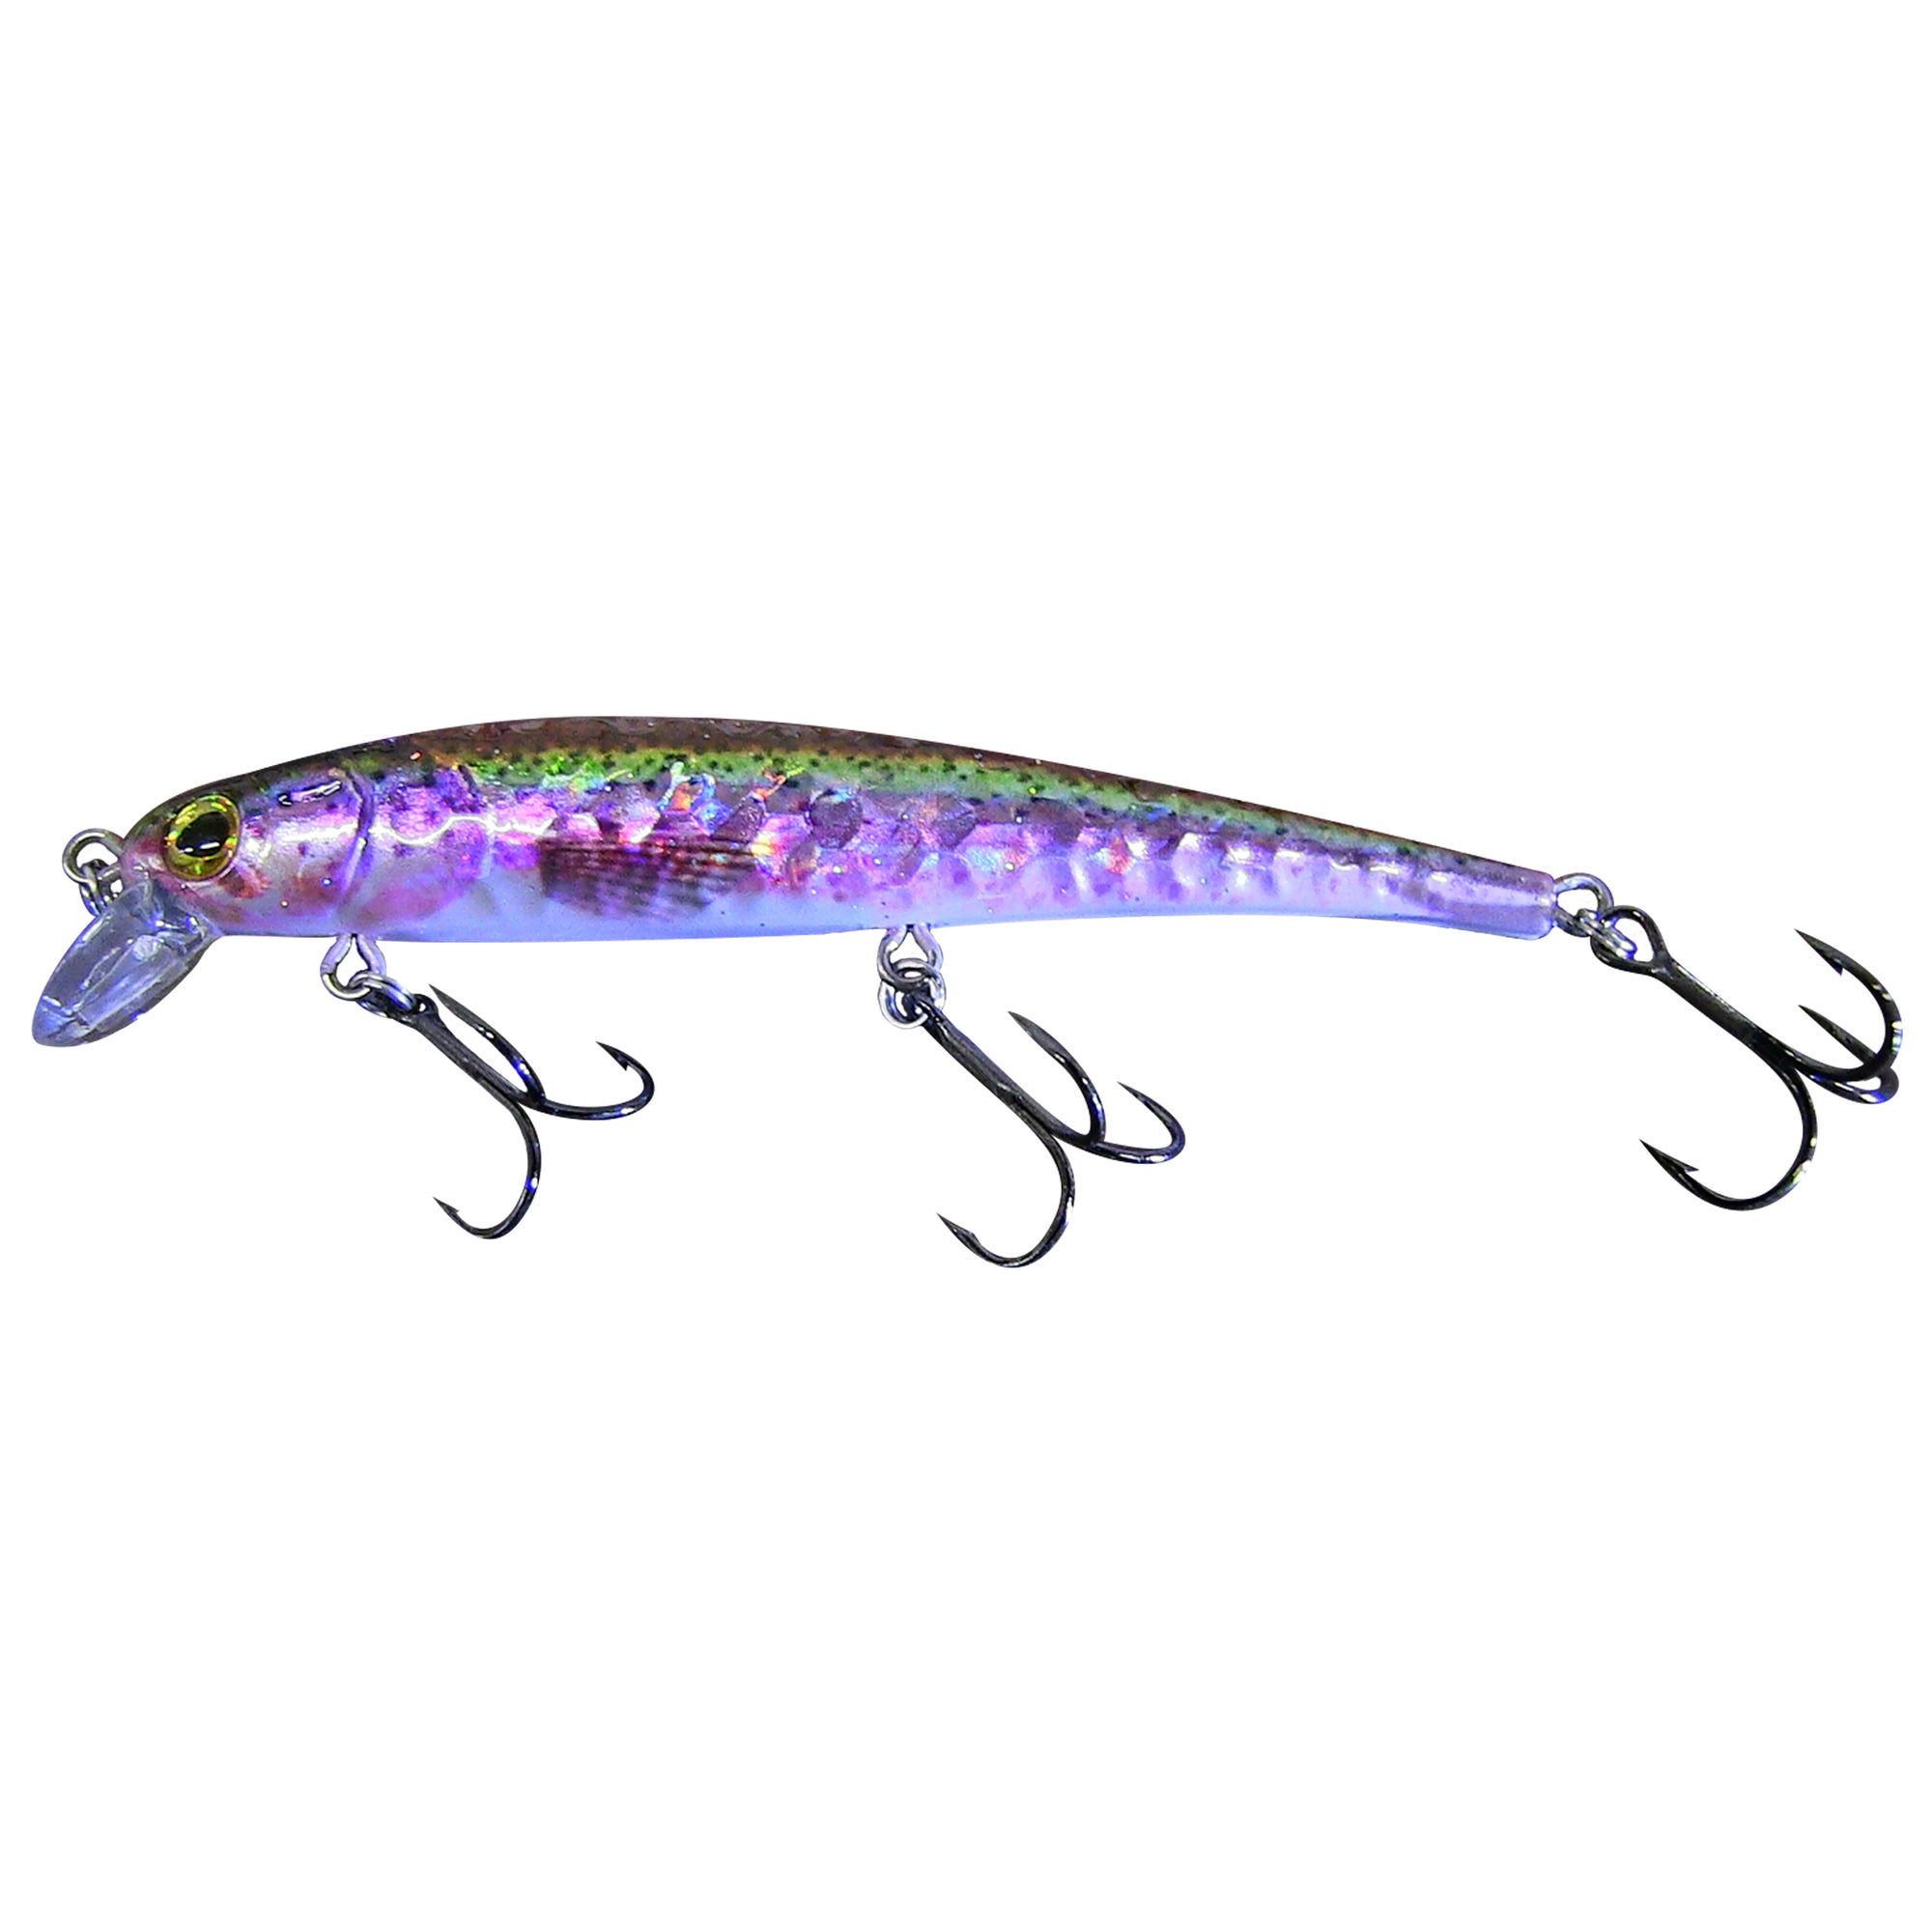 Cowbell Lake Trout/Salmon Attractor White Wonderbread